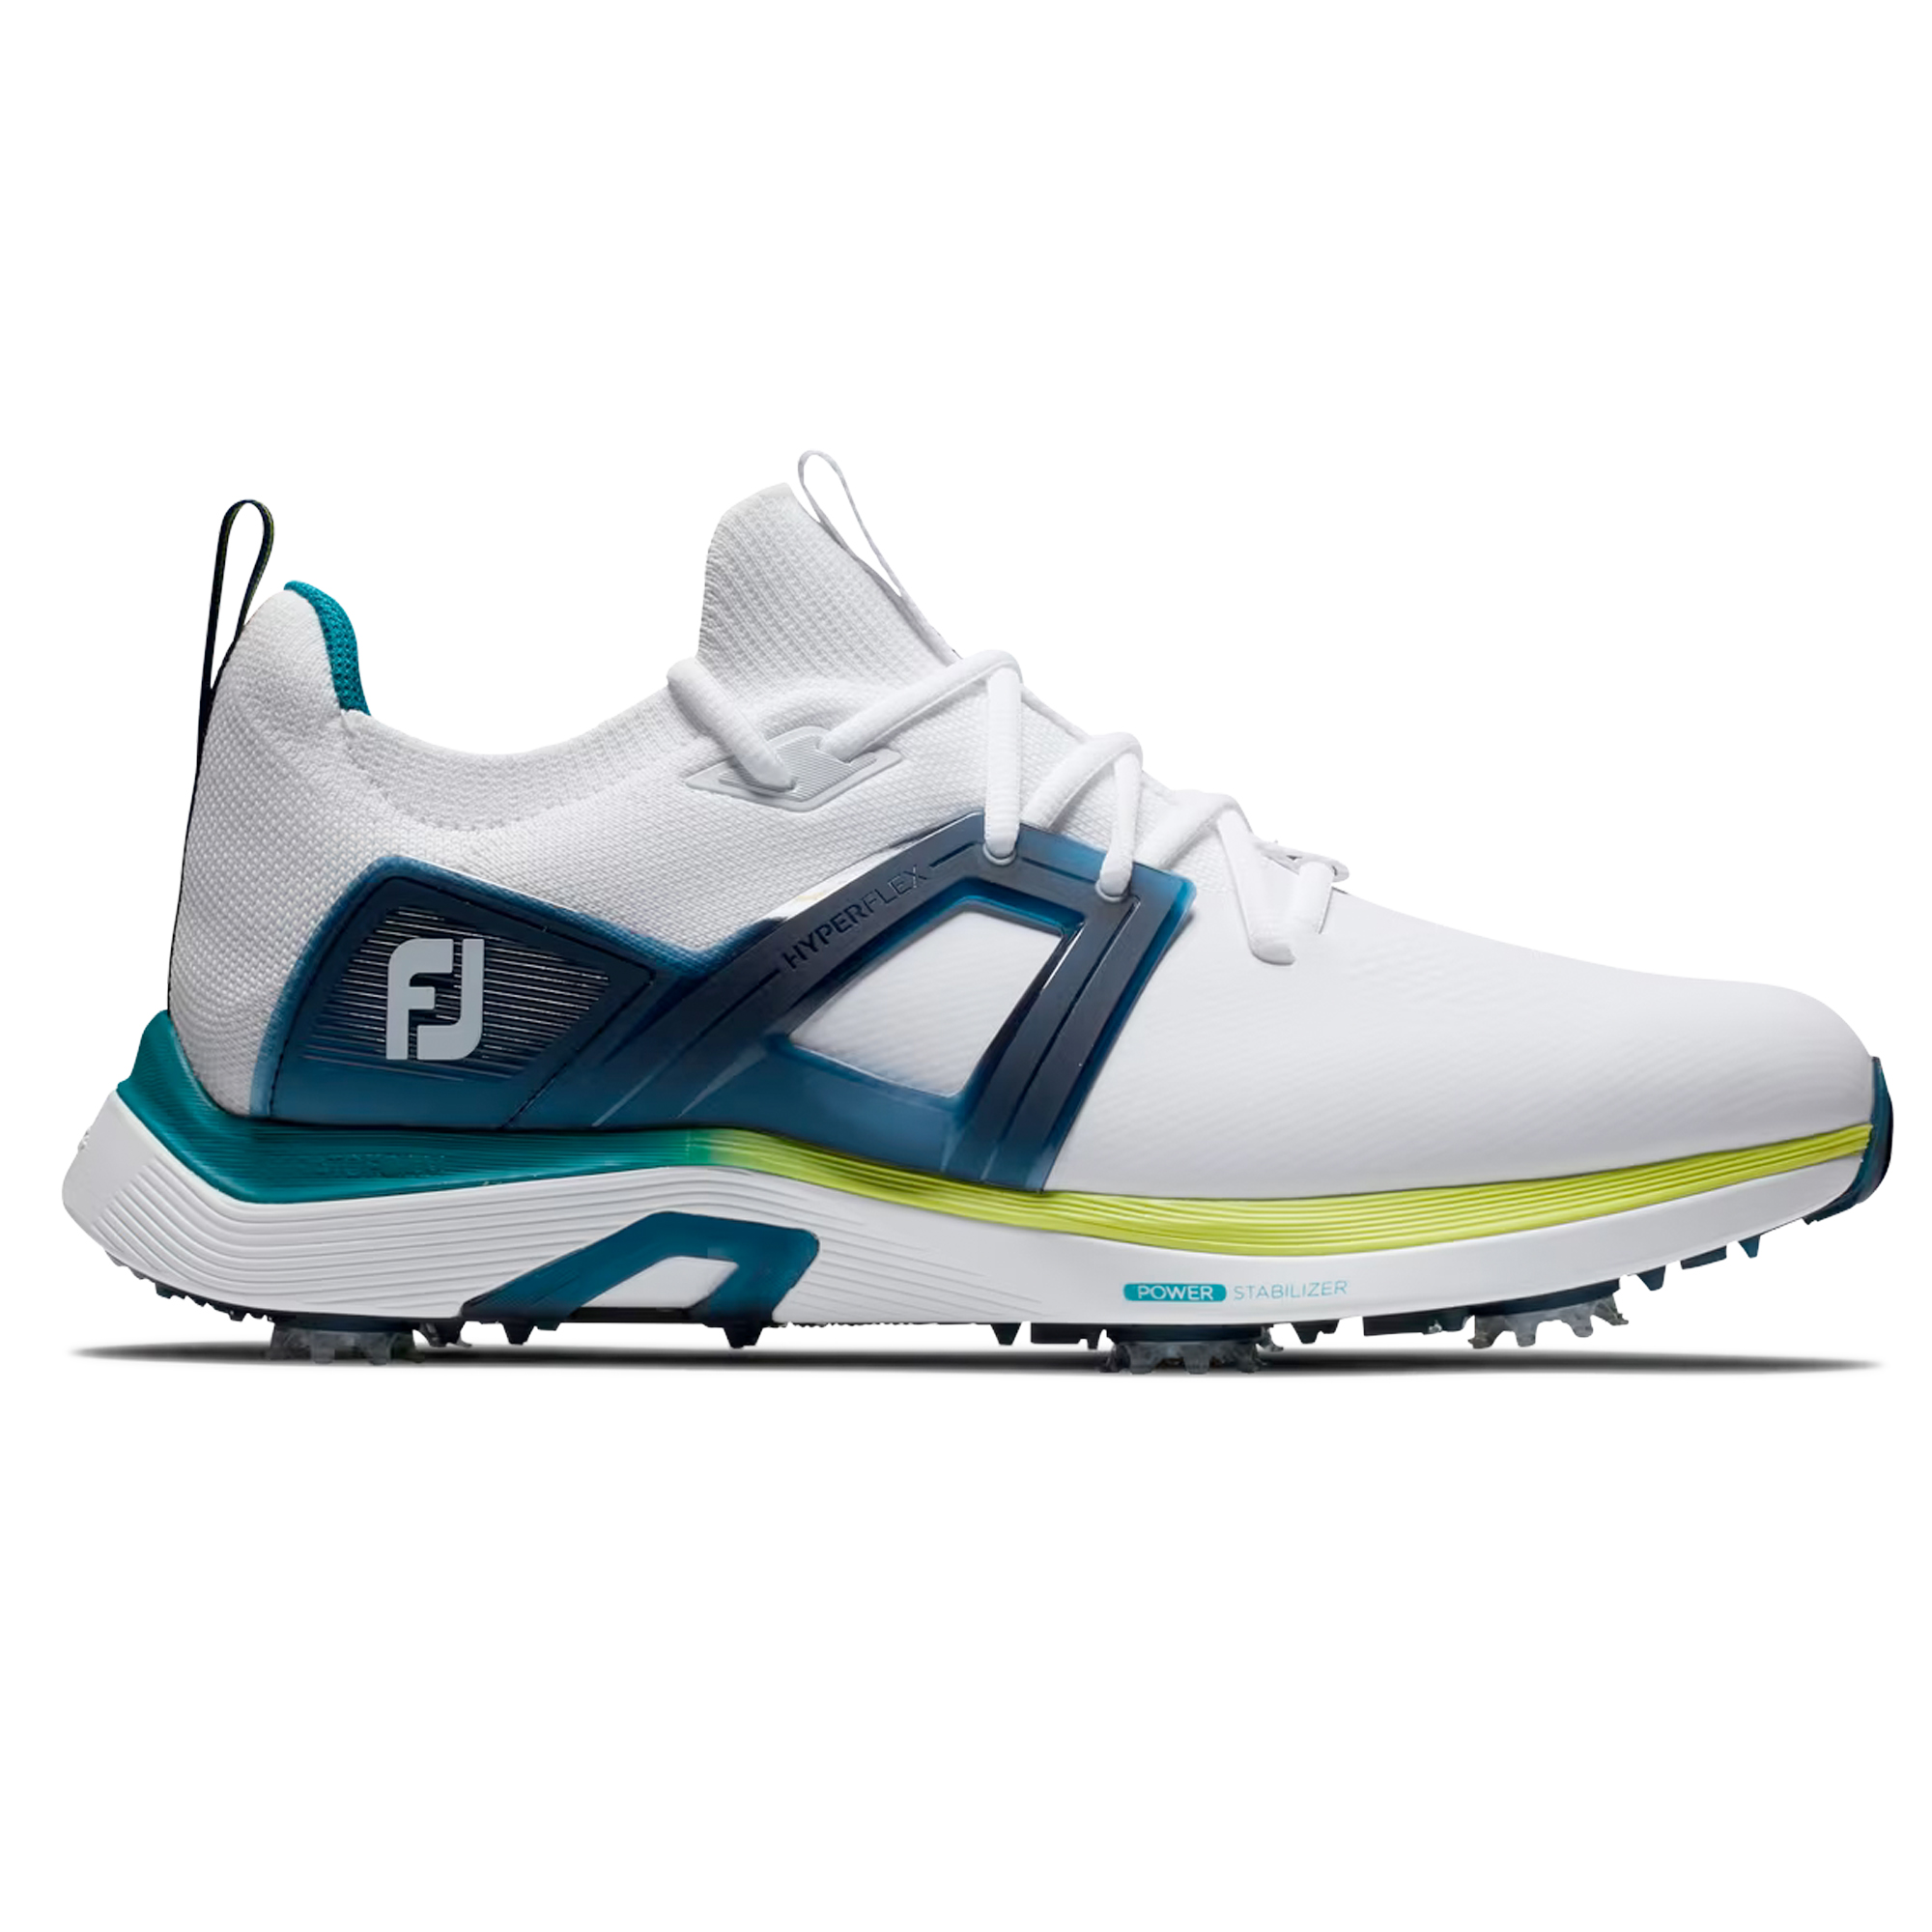 FootJoy Hyperflex Mens Spiked Golf Shoes  - White/Lime/Navy